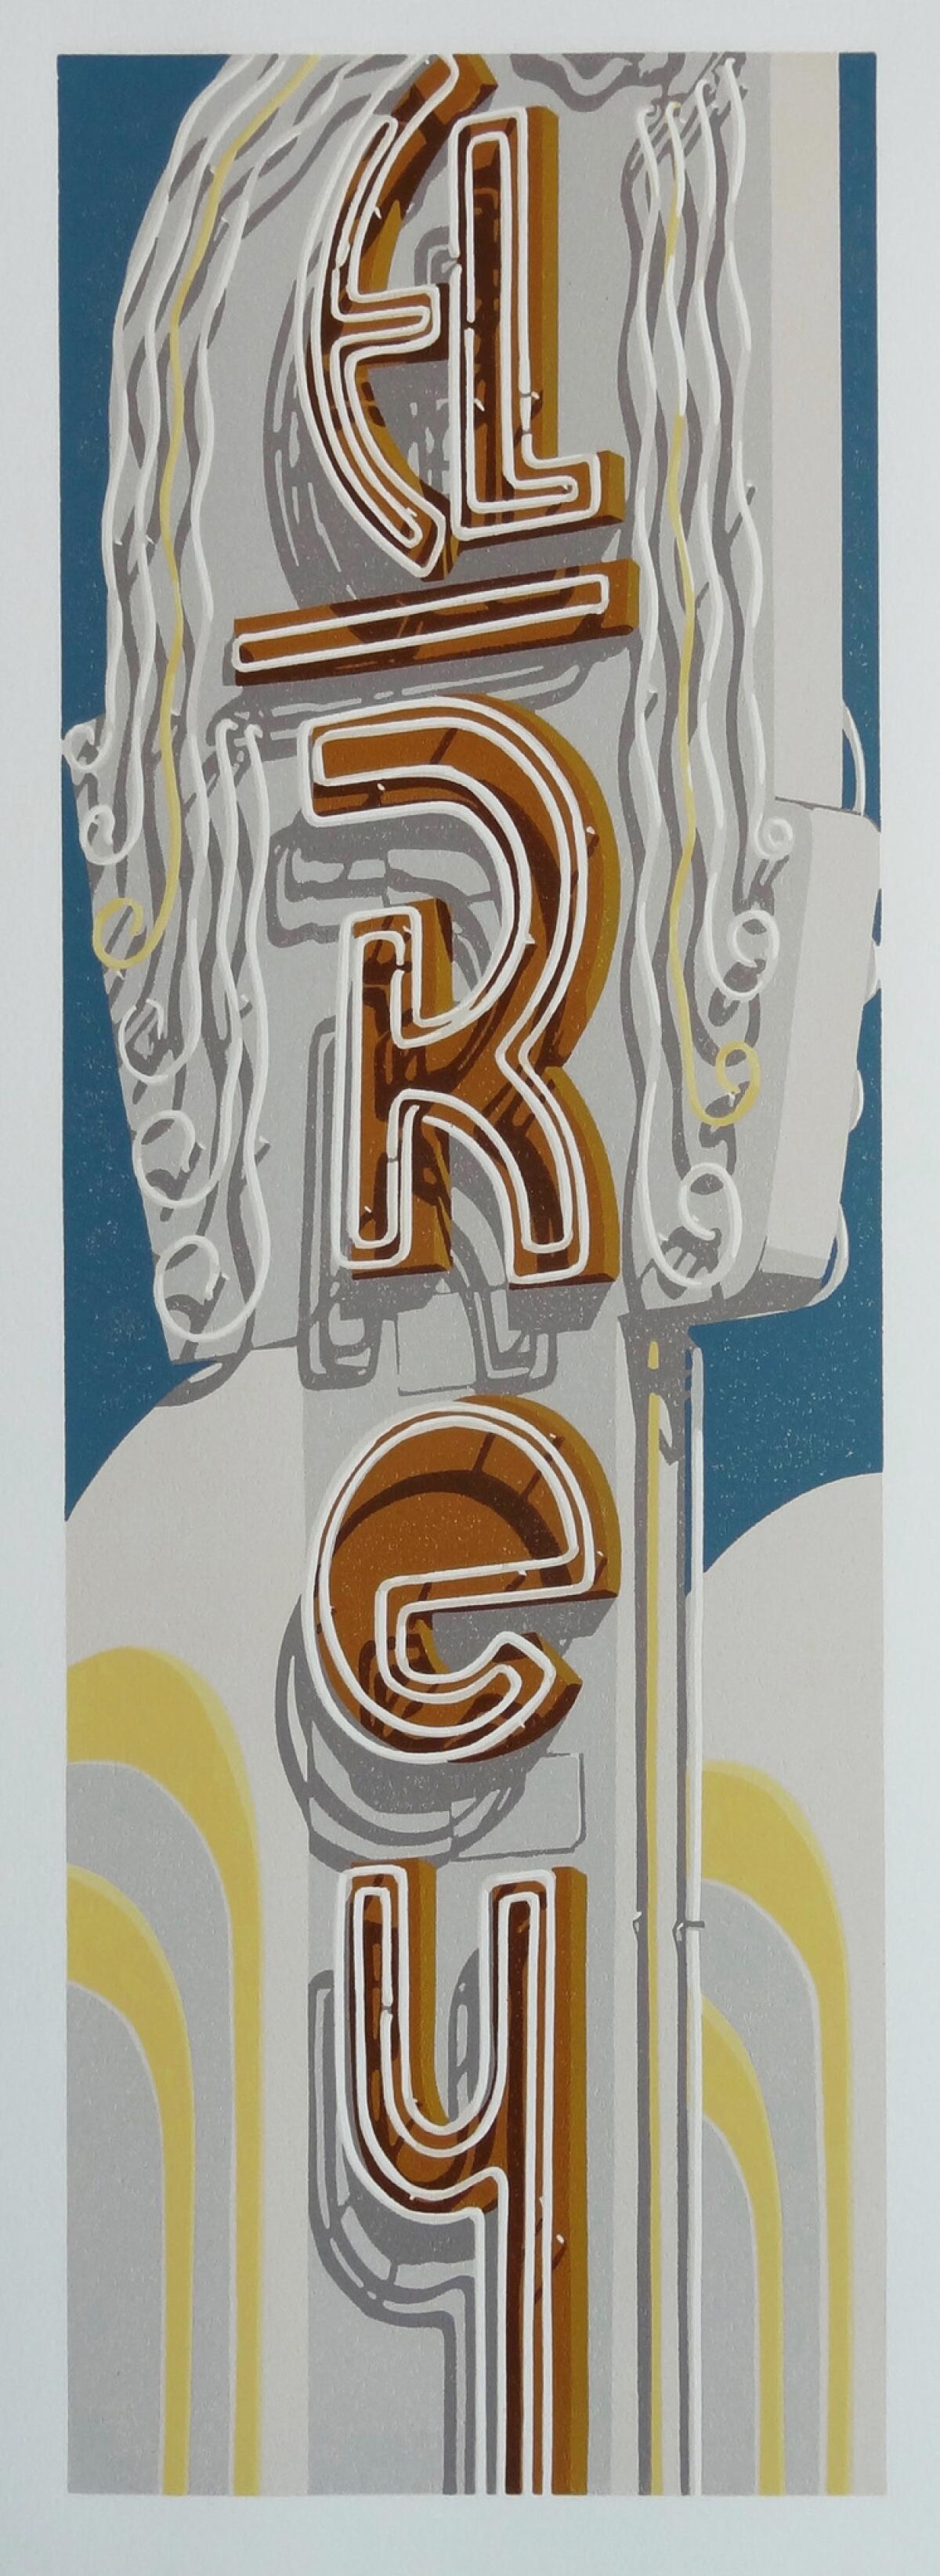 Dave Lefner's "The El Rey Theater," 2017. Reduction linocut in nine colors, 24 inches by 8 inches. (Dave Lefner)